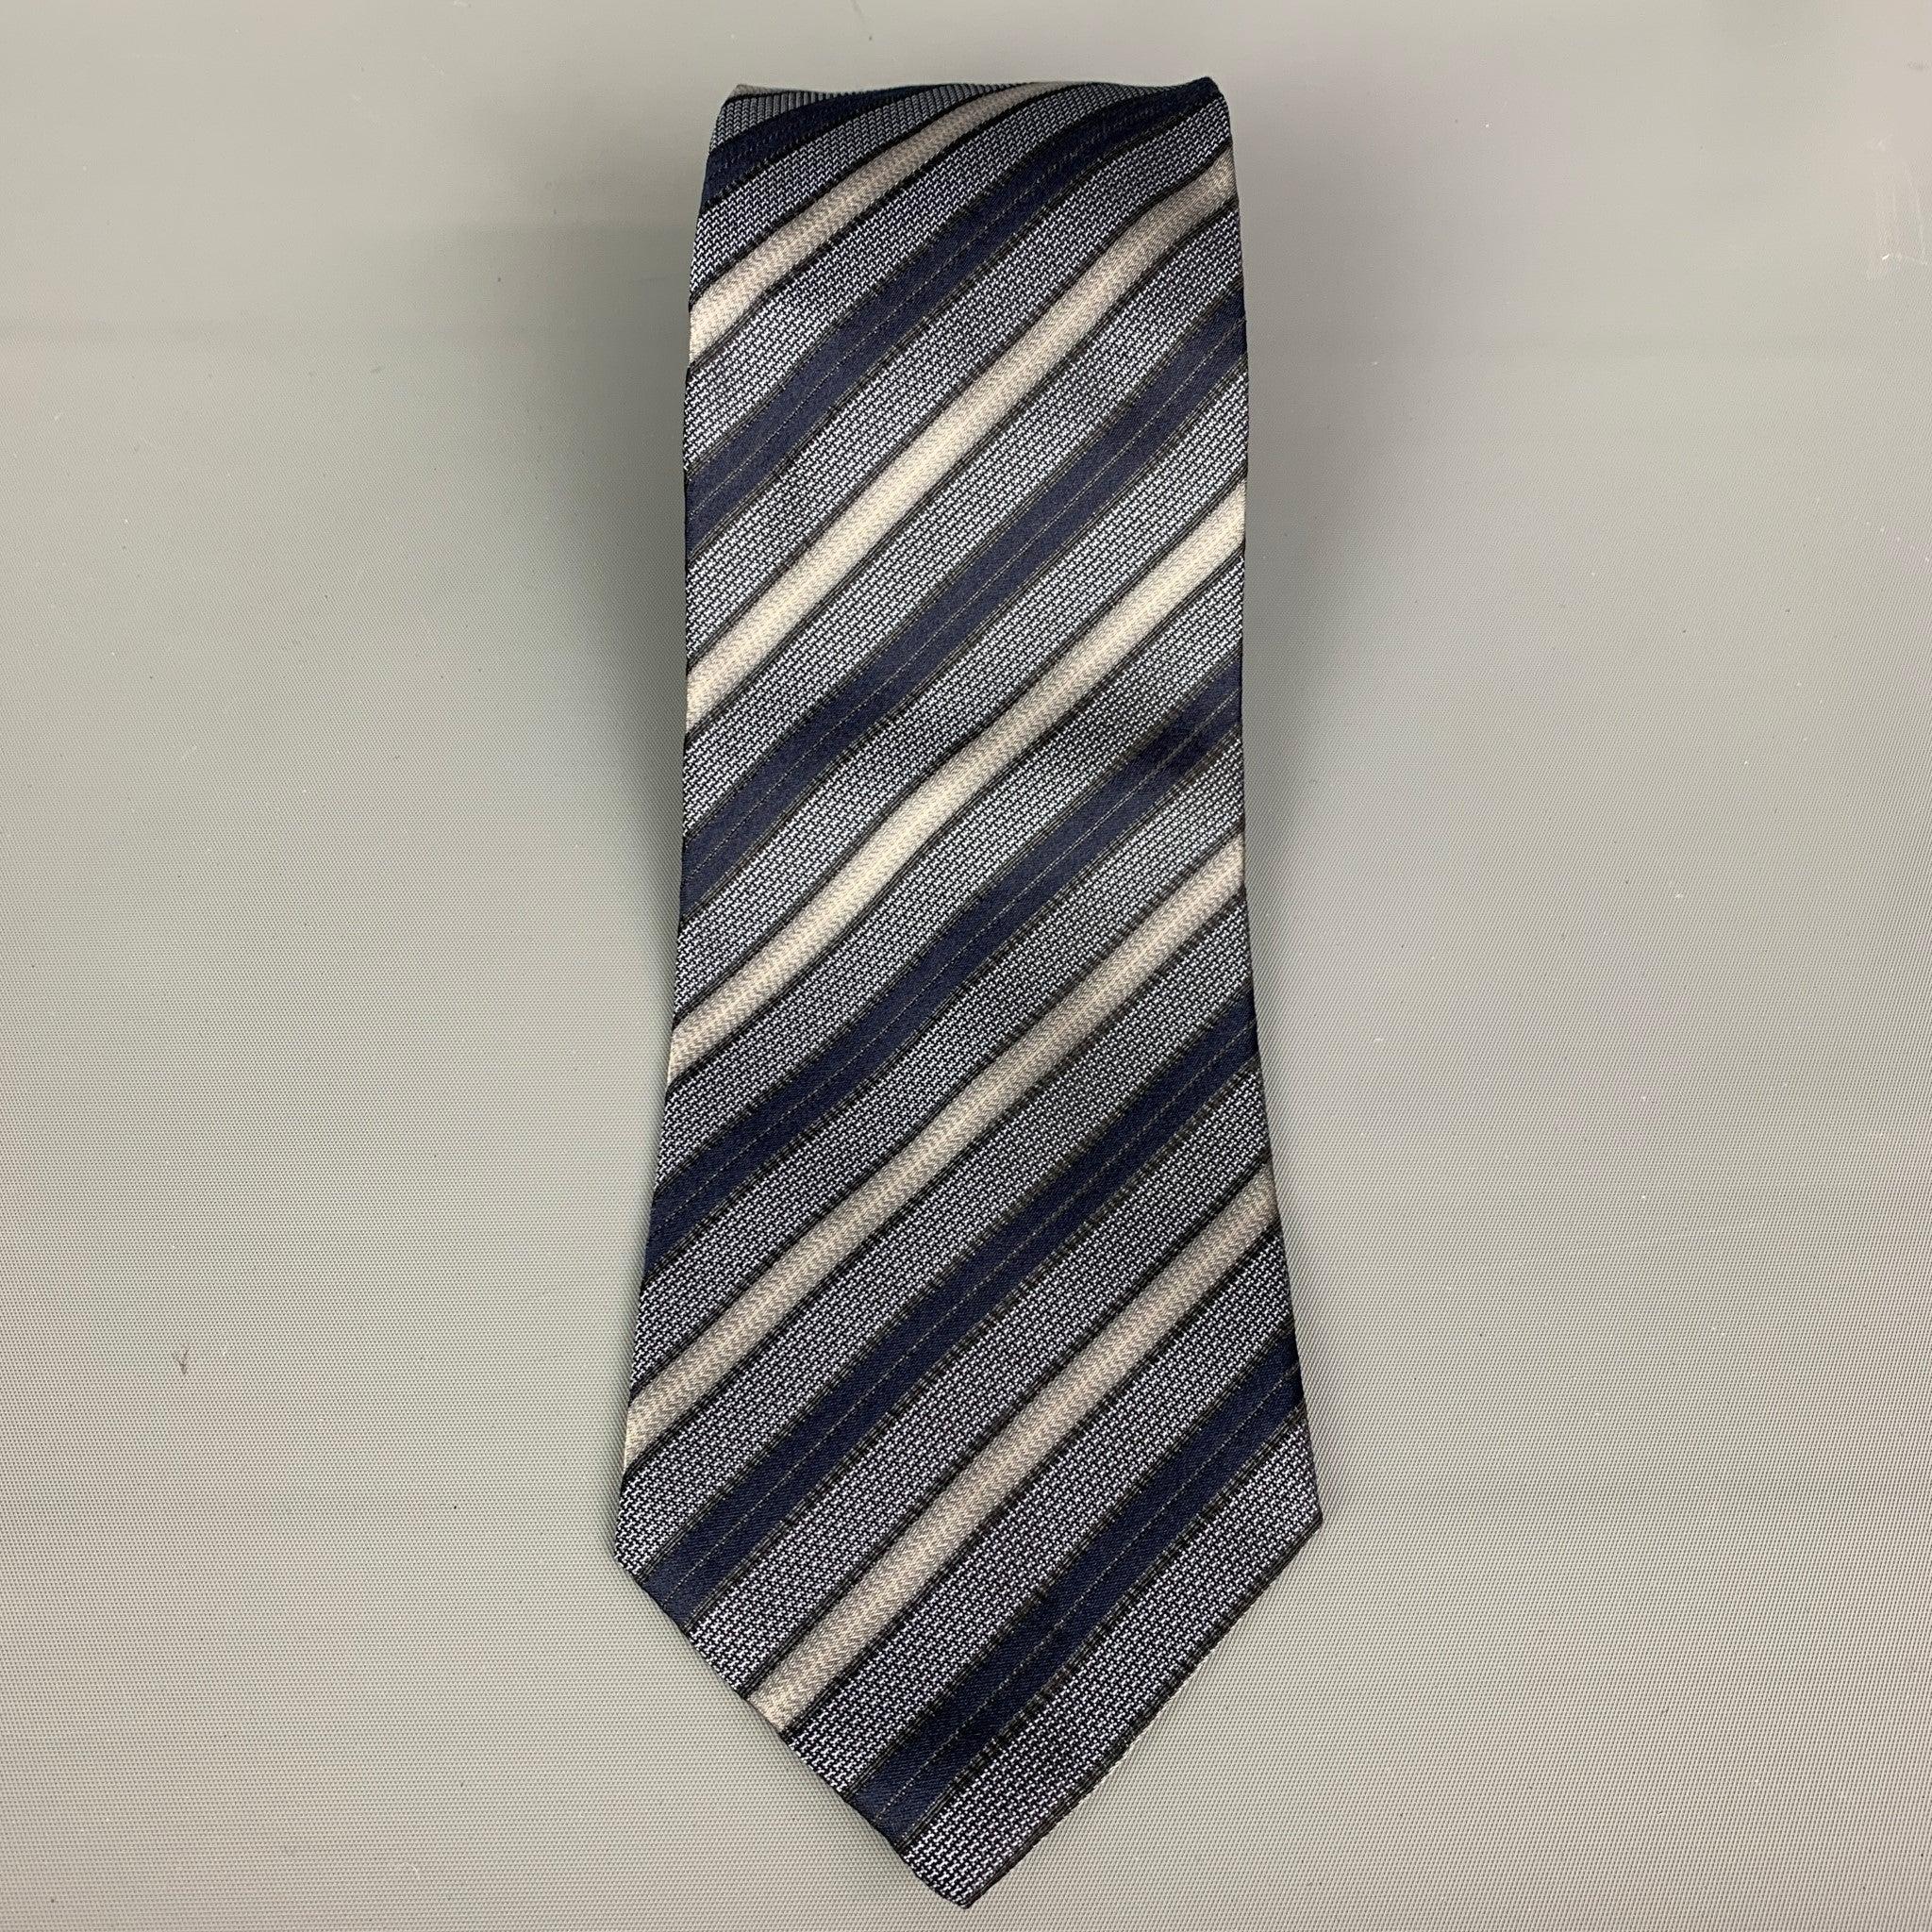 HUGO BOSS necktie comes in charcoal, black and blue stripped silk material. Made in Italy.Very Good Pre-Owned Condition. Minor sign of wear.Width: 4 inches Length: 61 inches 

  
  
Reference: 19856
Category: Tie
More Details
    
Brand:  HUGO